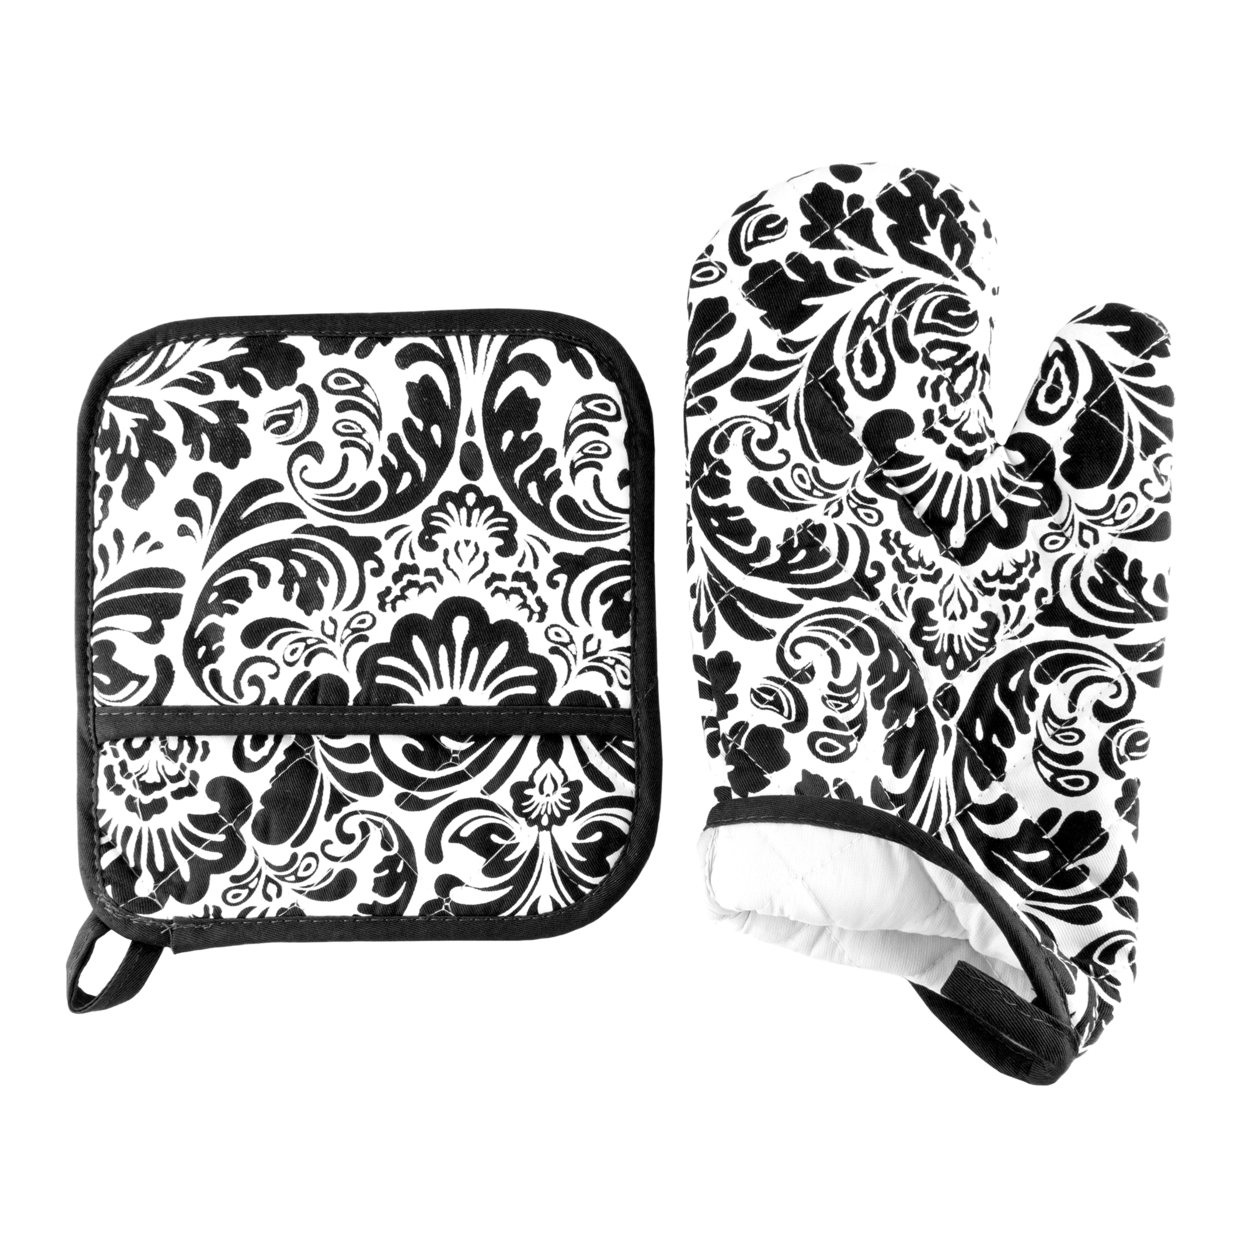 Oven Mitt And Pot Hold Oversized Flame Heat Protection Big Kitchen Safety Black